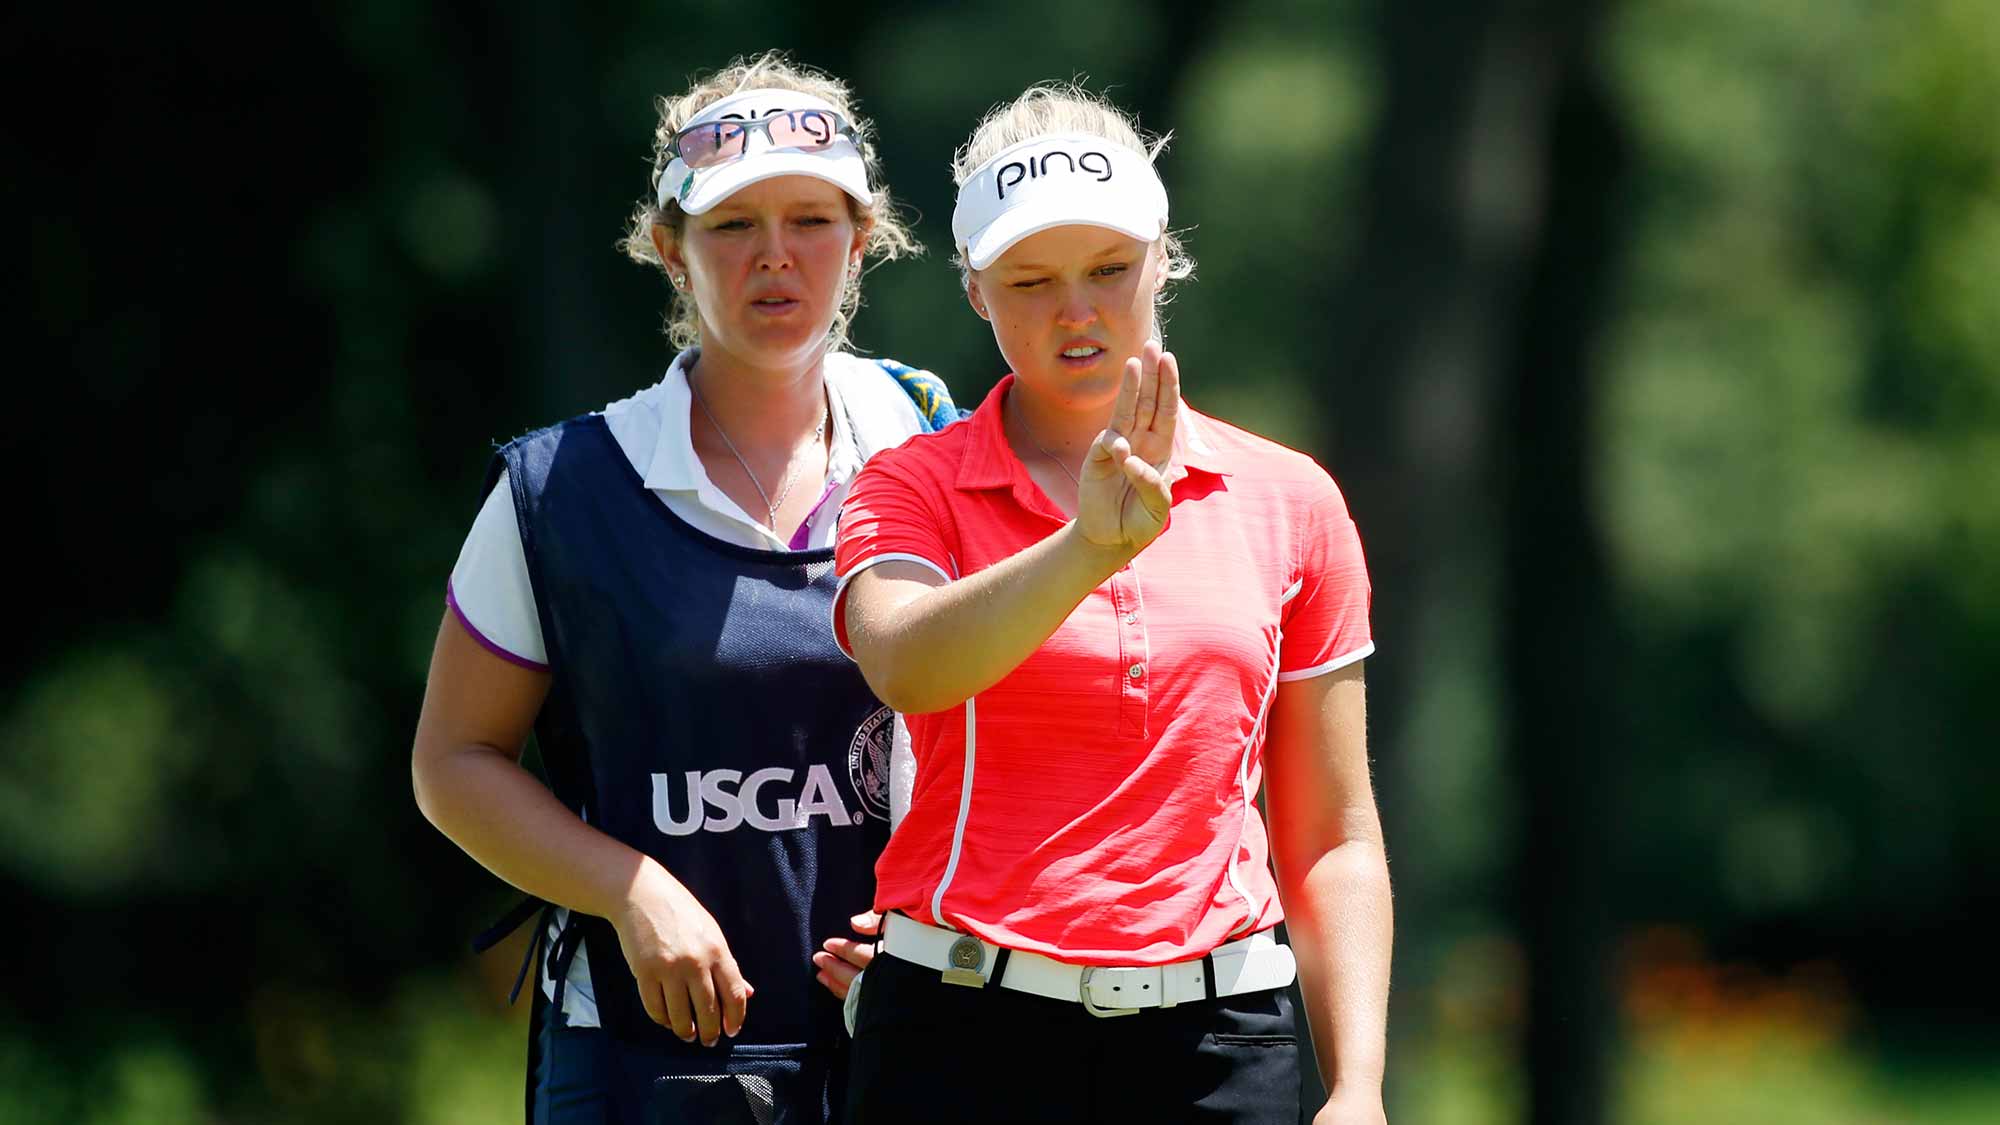 Brooke Henderson of Canada lines up a putt with her sisiter/caddie Brittany on the 16th green during the second round of the U.S. Women's Open at Lancaster Country Club